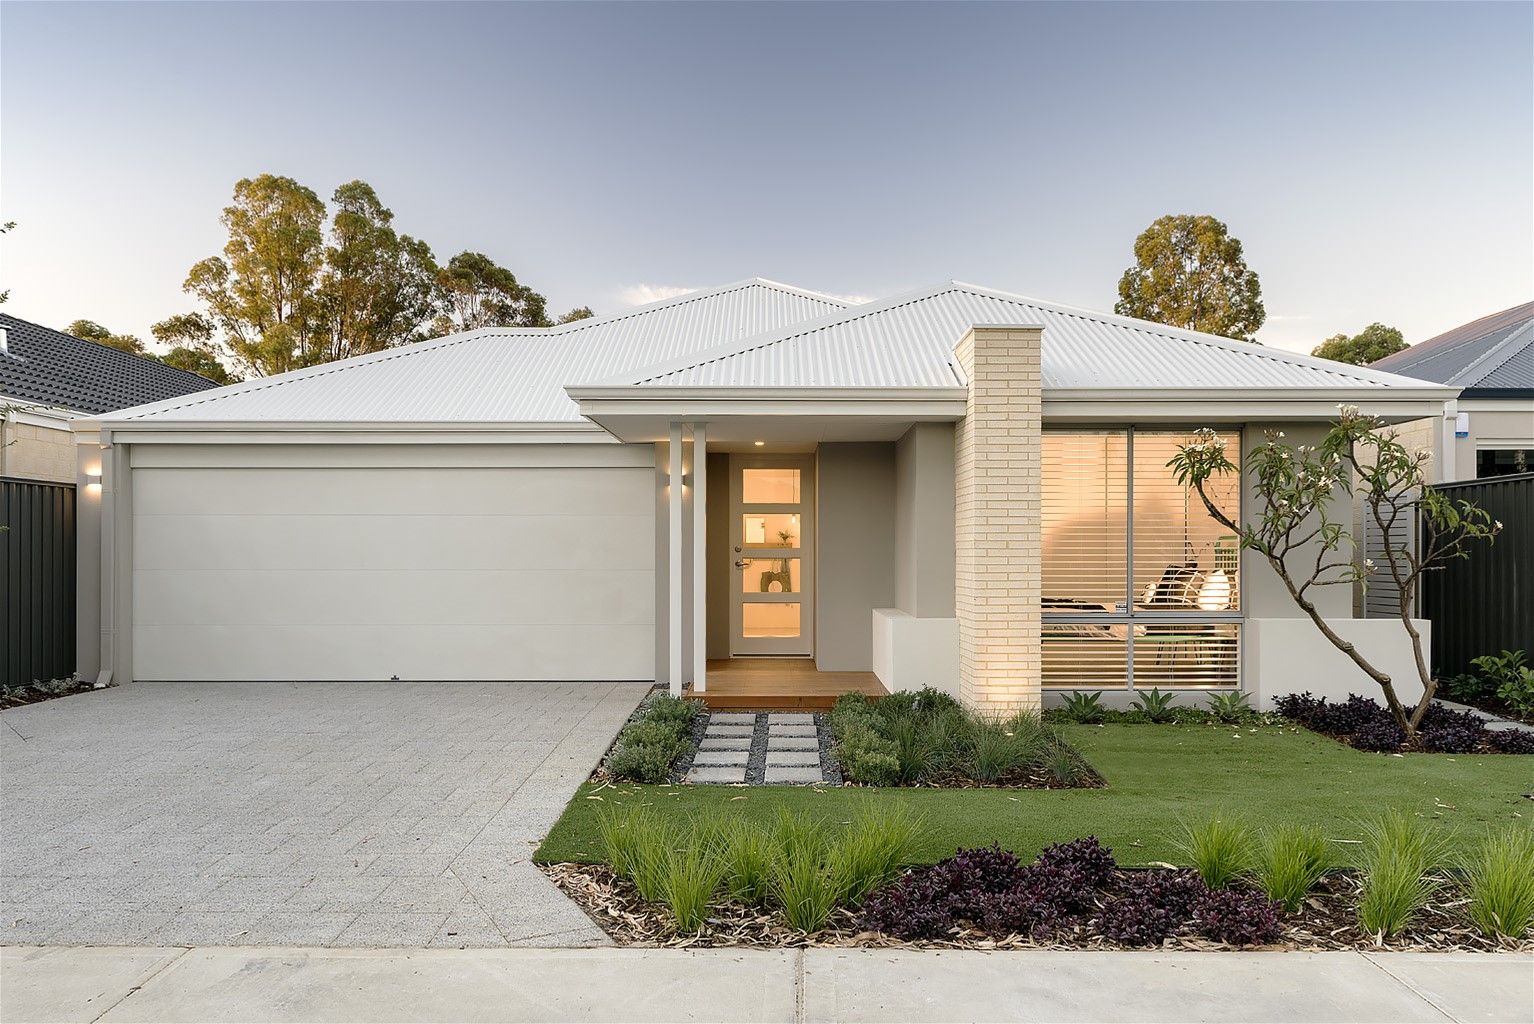 4 bedrooms New House & Land in 1862 Sleaford Approach GOLDEN BAY WA, 6174